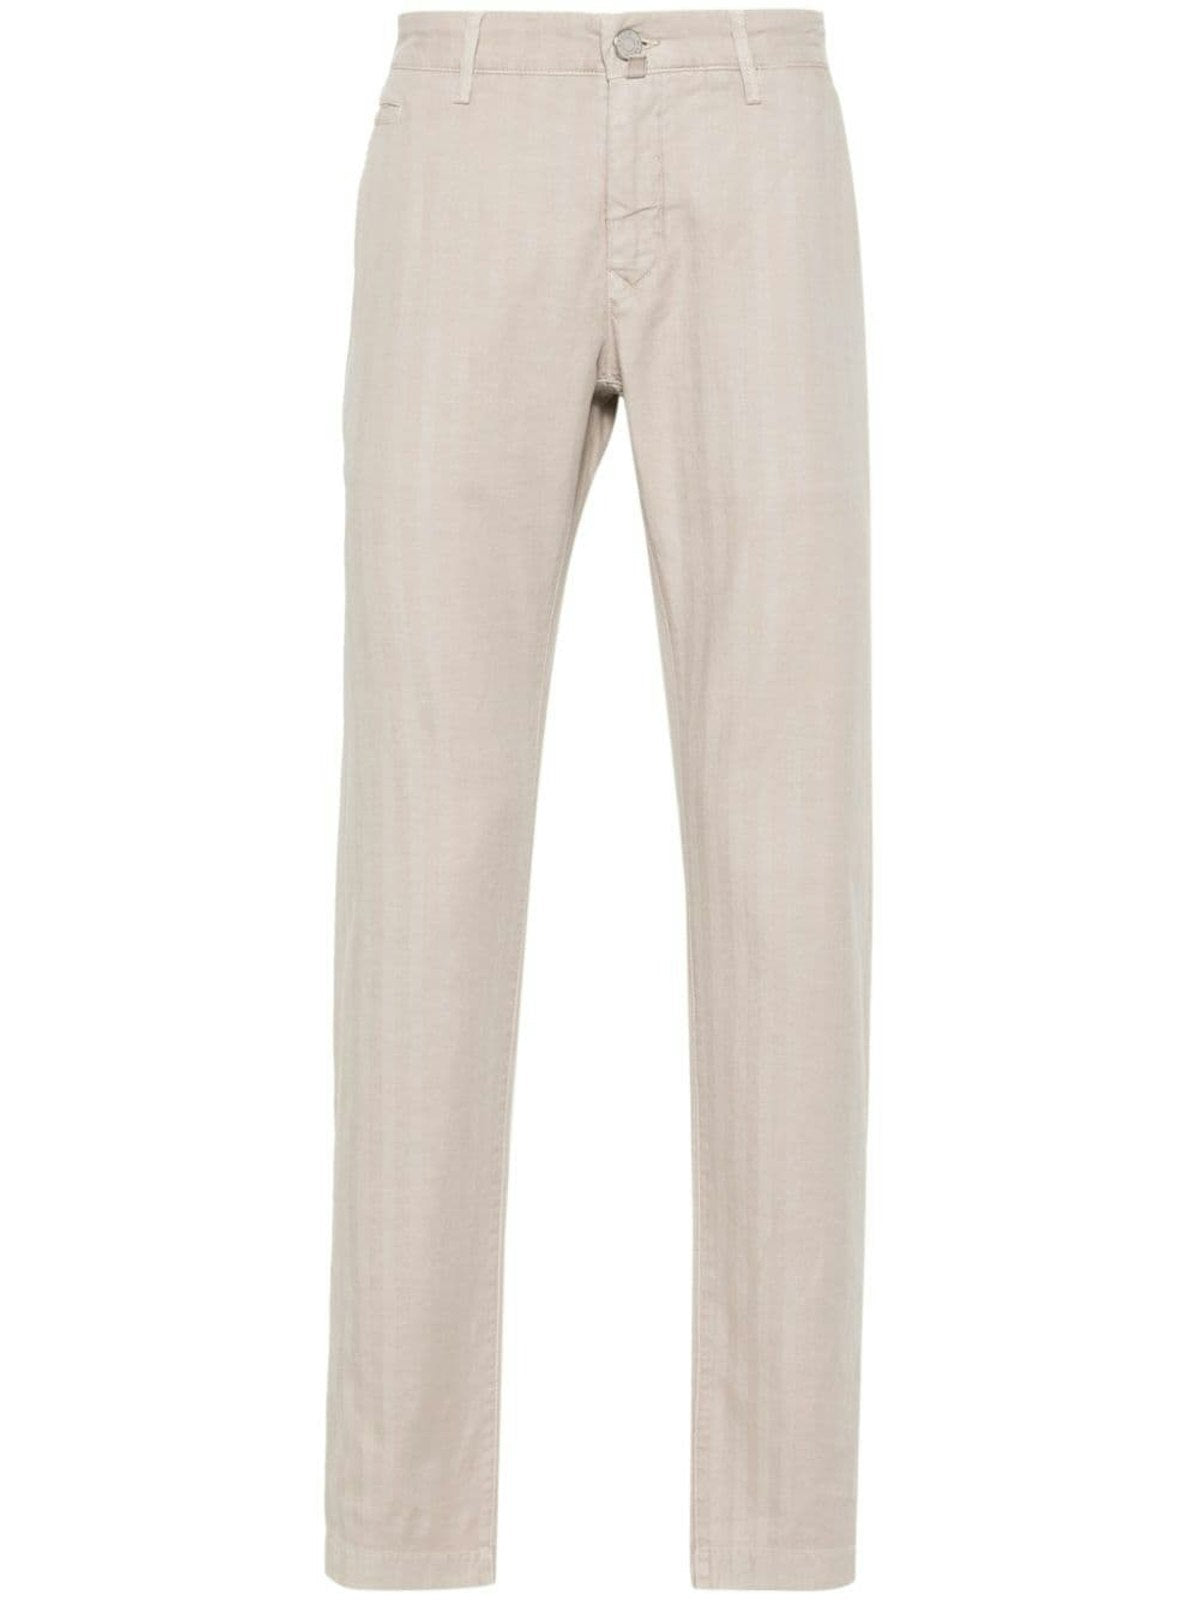 S4002A80 JACOB COHEN BOBBY SLIM FIT CHINO TROUSERS